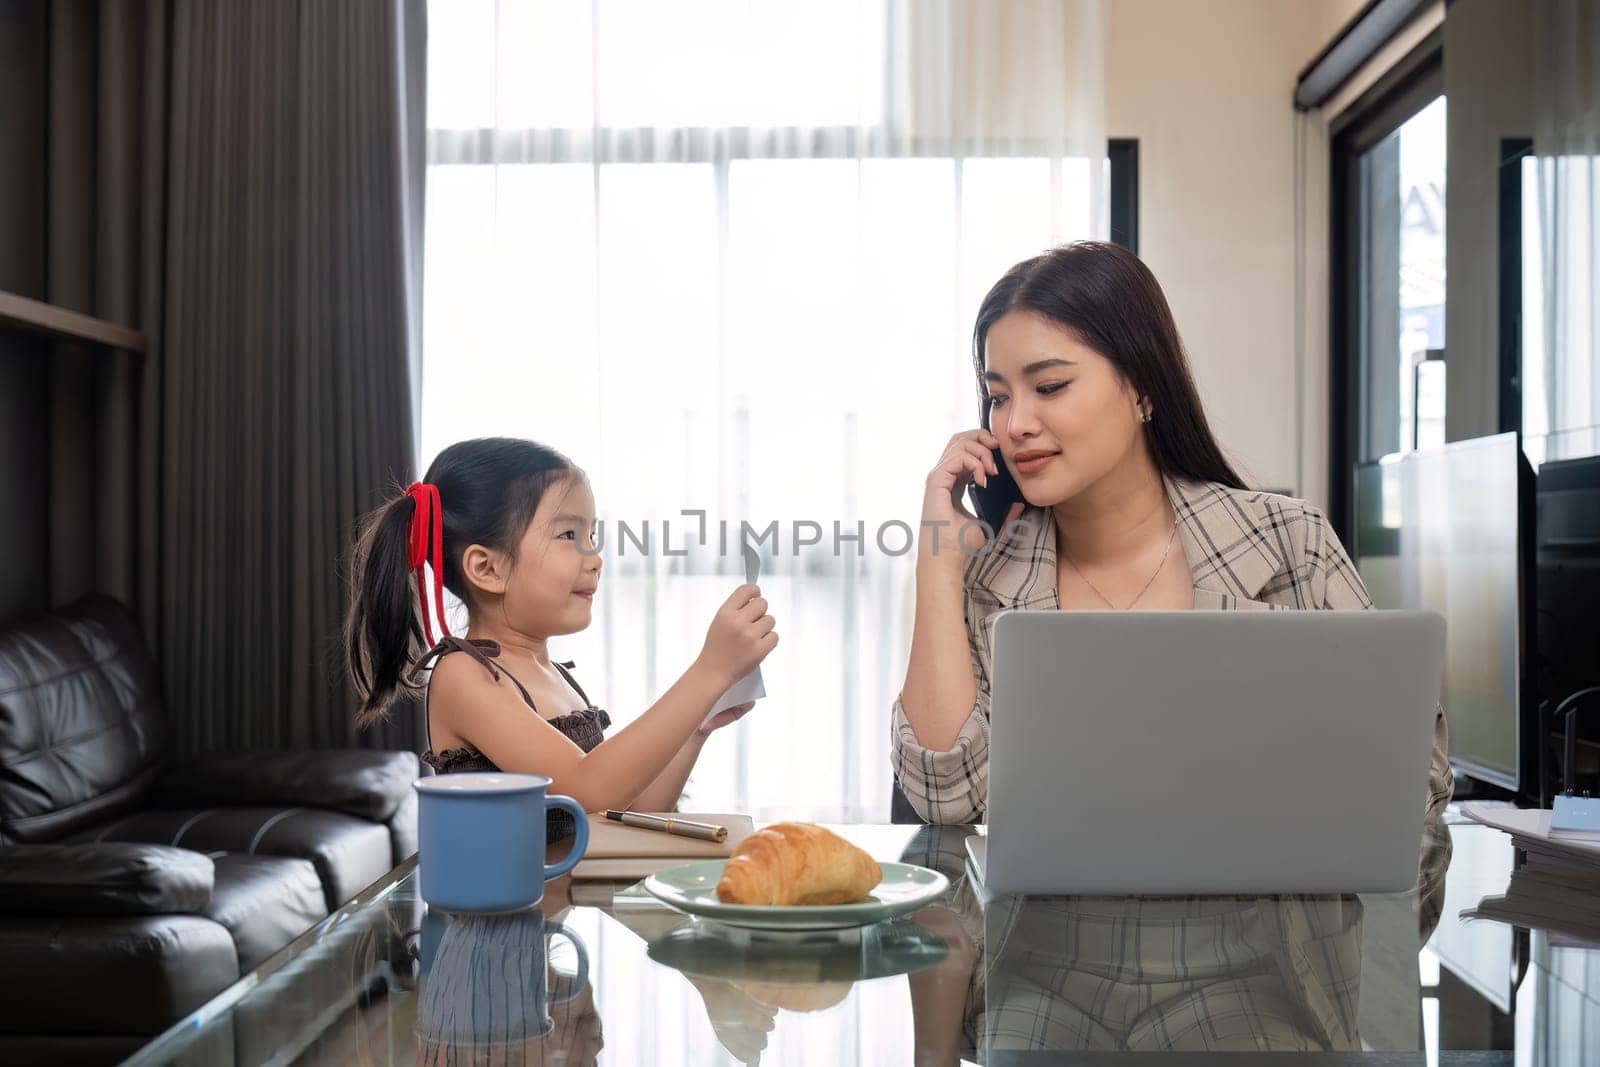 The young woman works from home, raises her daughter, and discusses work with co-workers on the phone and online. by wichayada